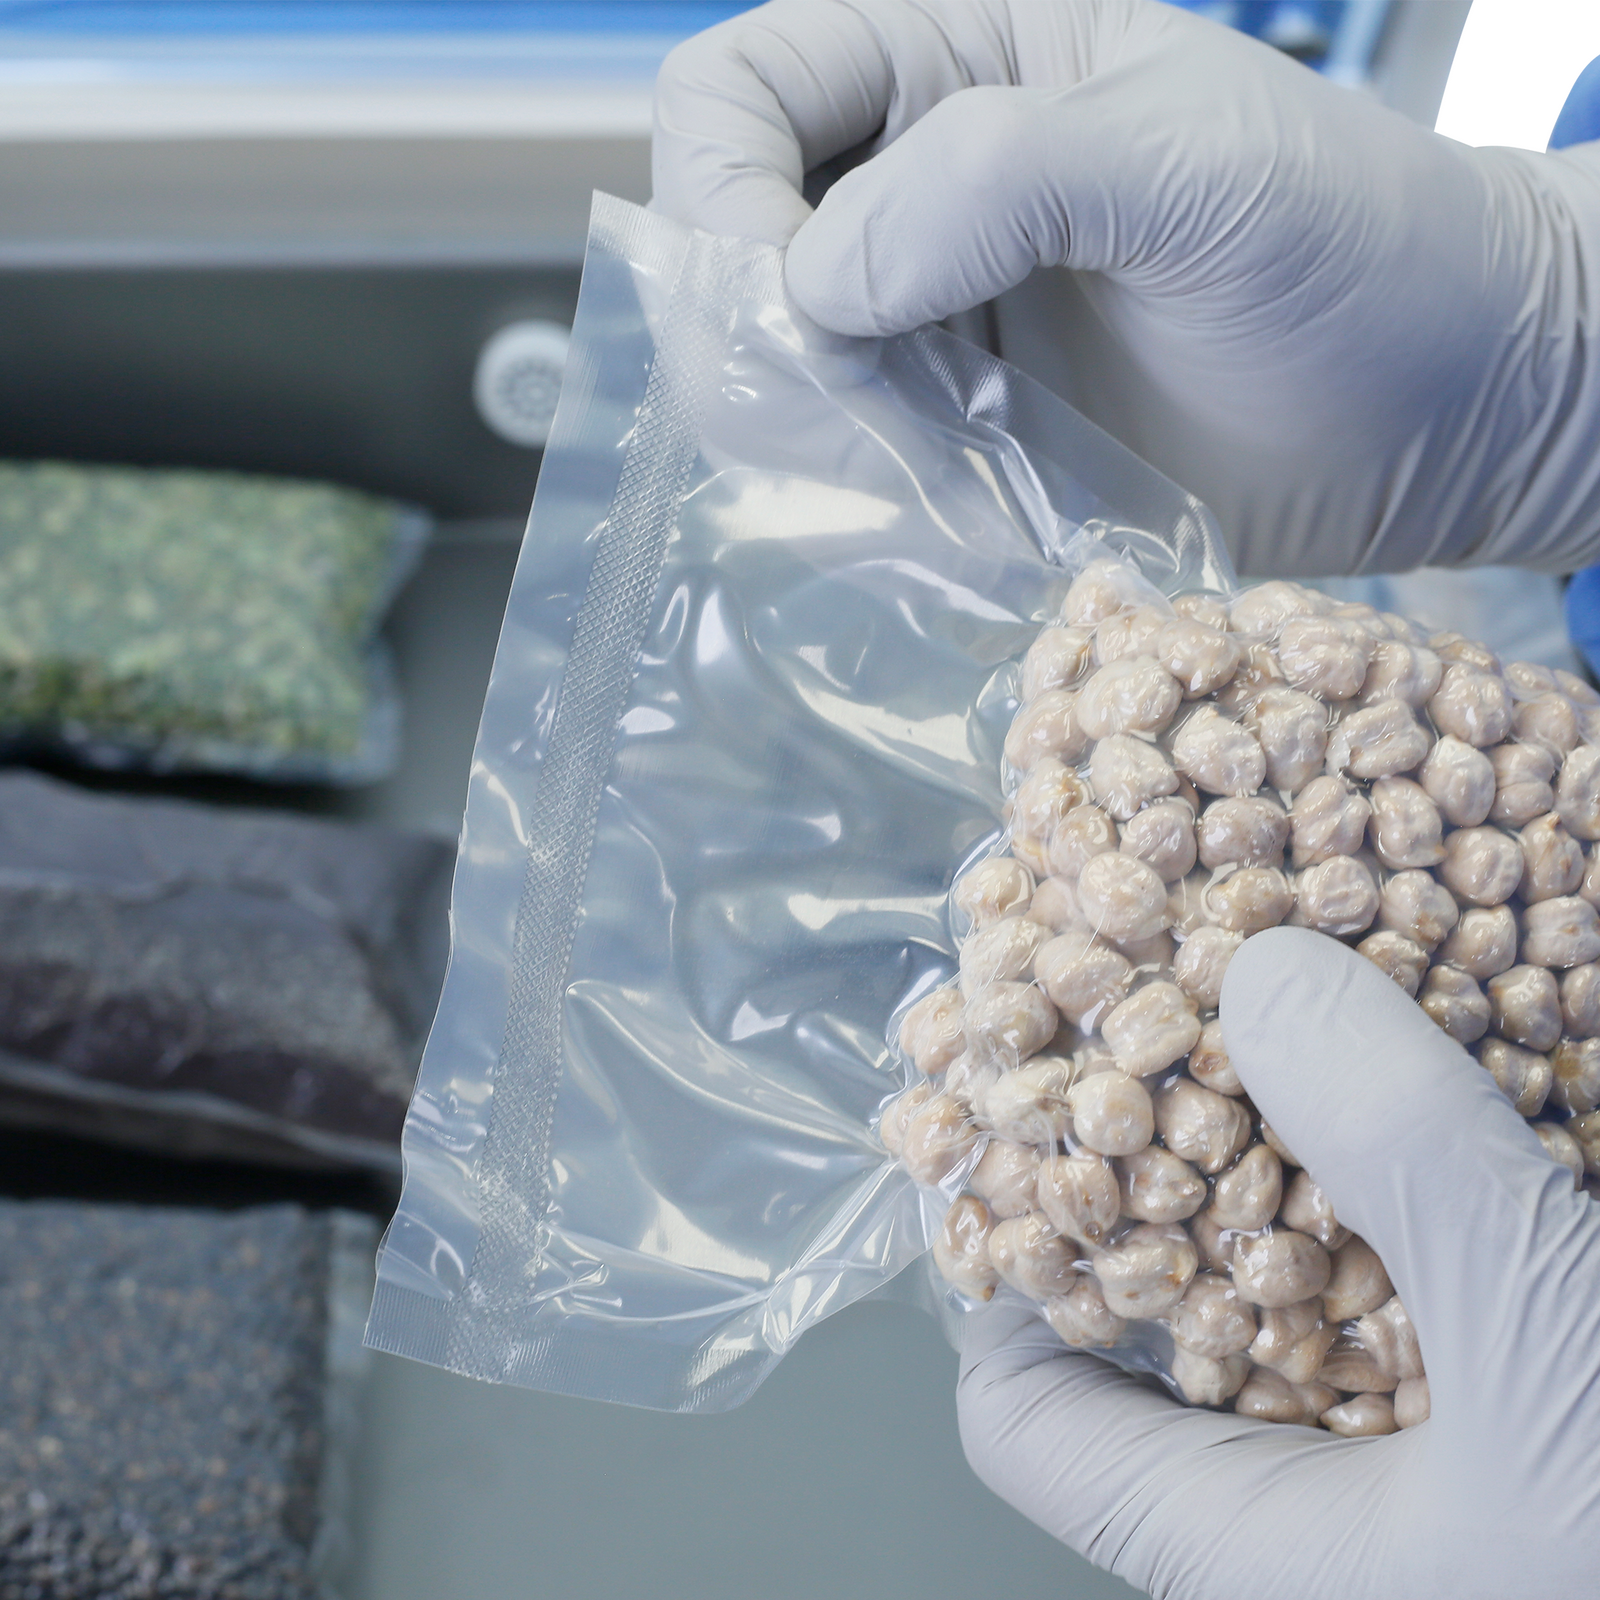 Person wearing nitrile gloves holding a bag with chick peas. He is showing the seal done by a Commercial single chamber JORESTECH vacuum sealer with dual seal bars